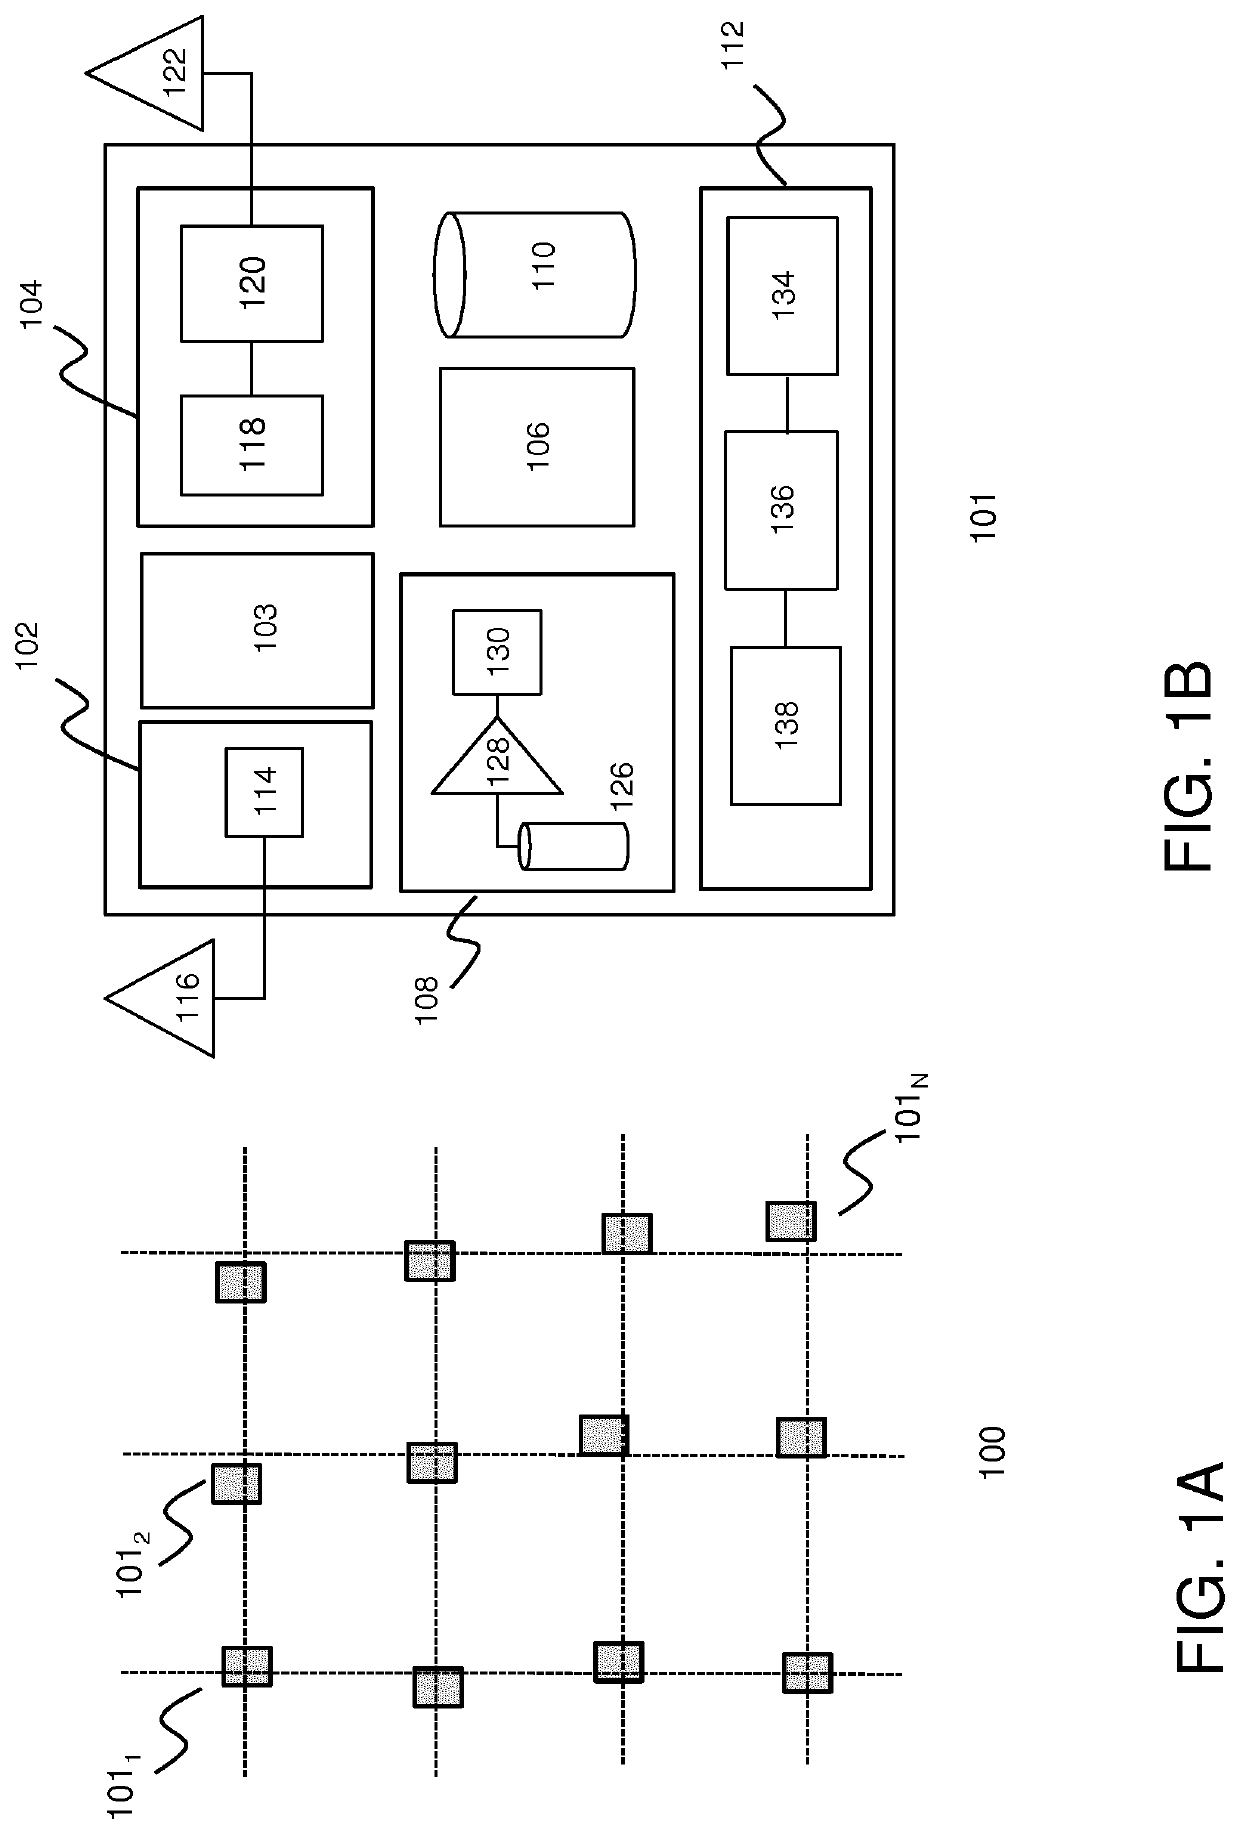 Position-based broadcast protocol and time slot schedule for a wireless mesh network